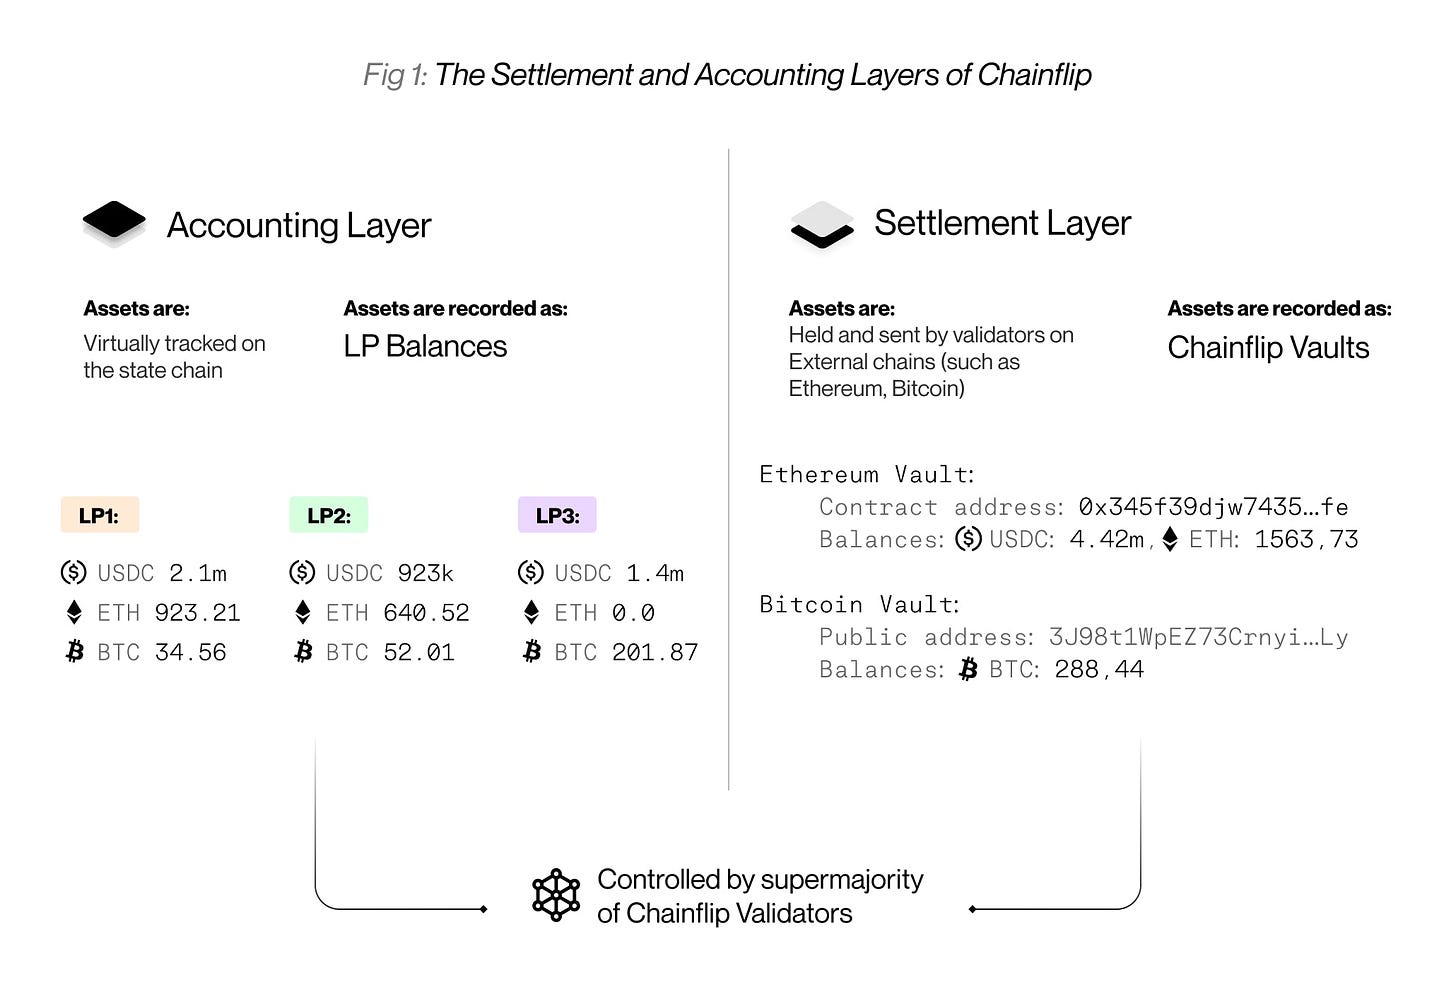 Settlement and Accounting Layers